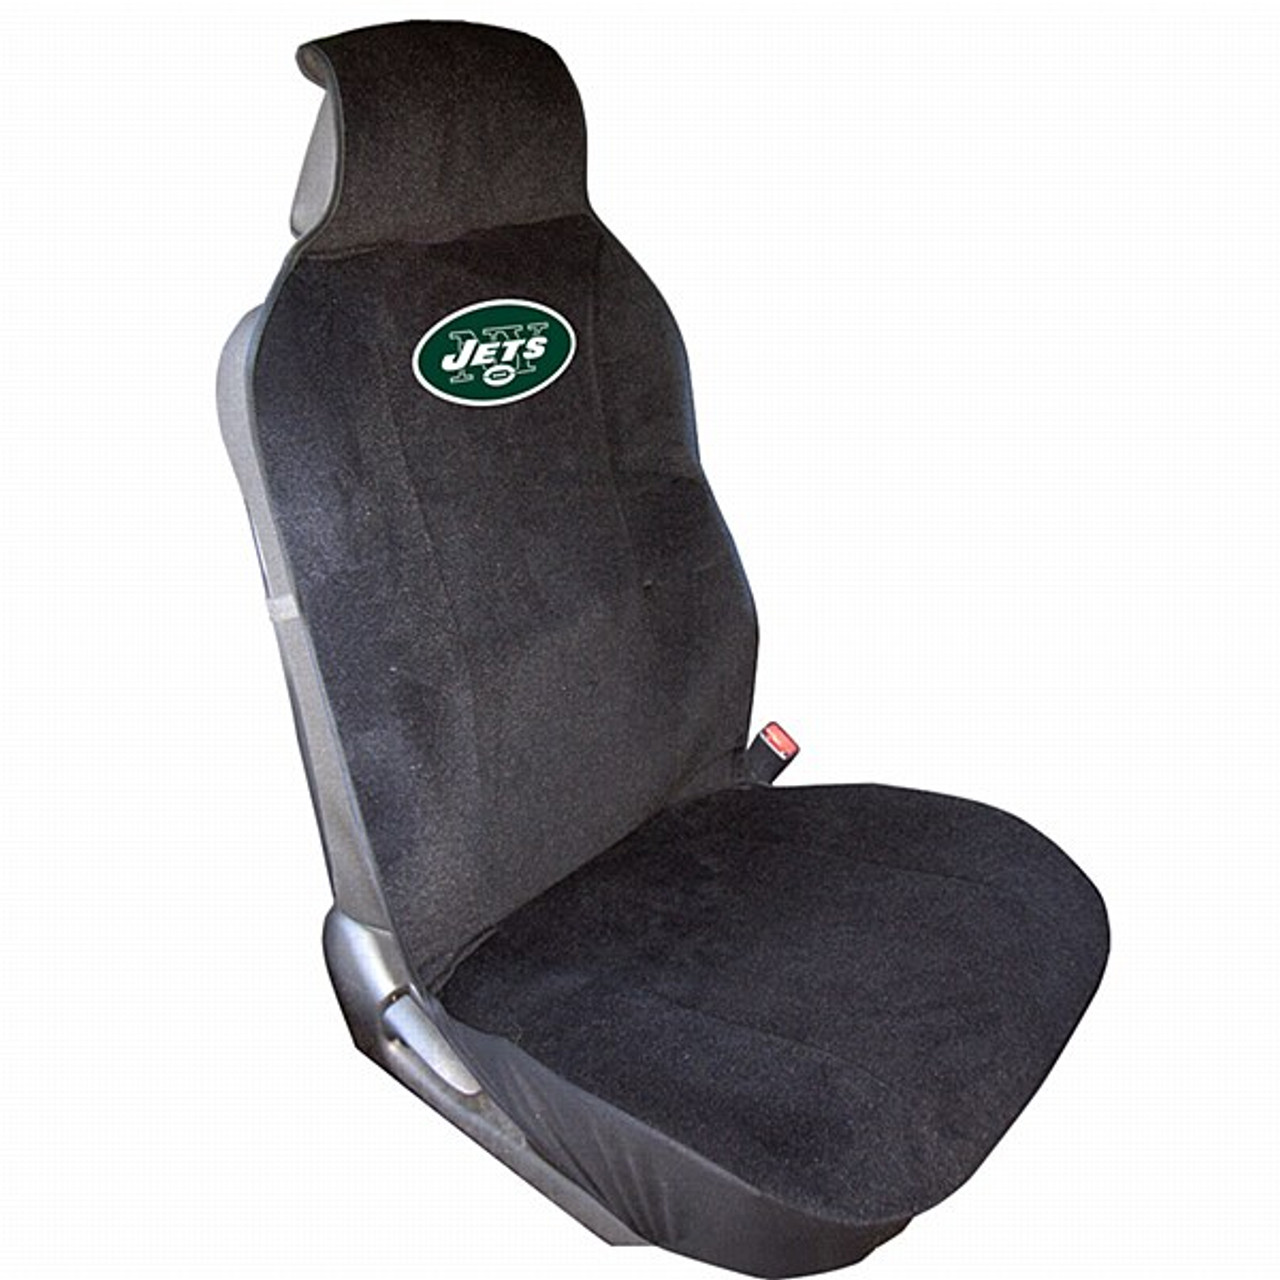 Fremont Die New York Jets Seat Cover